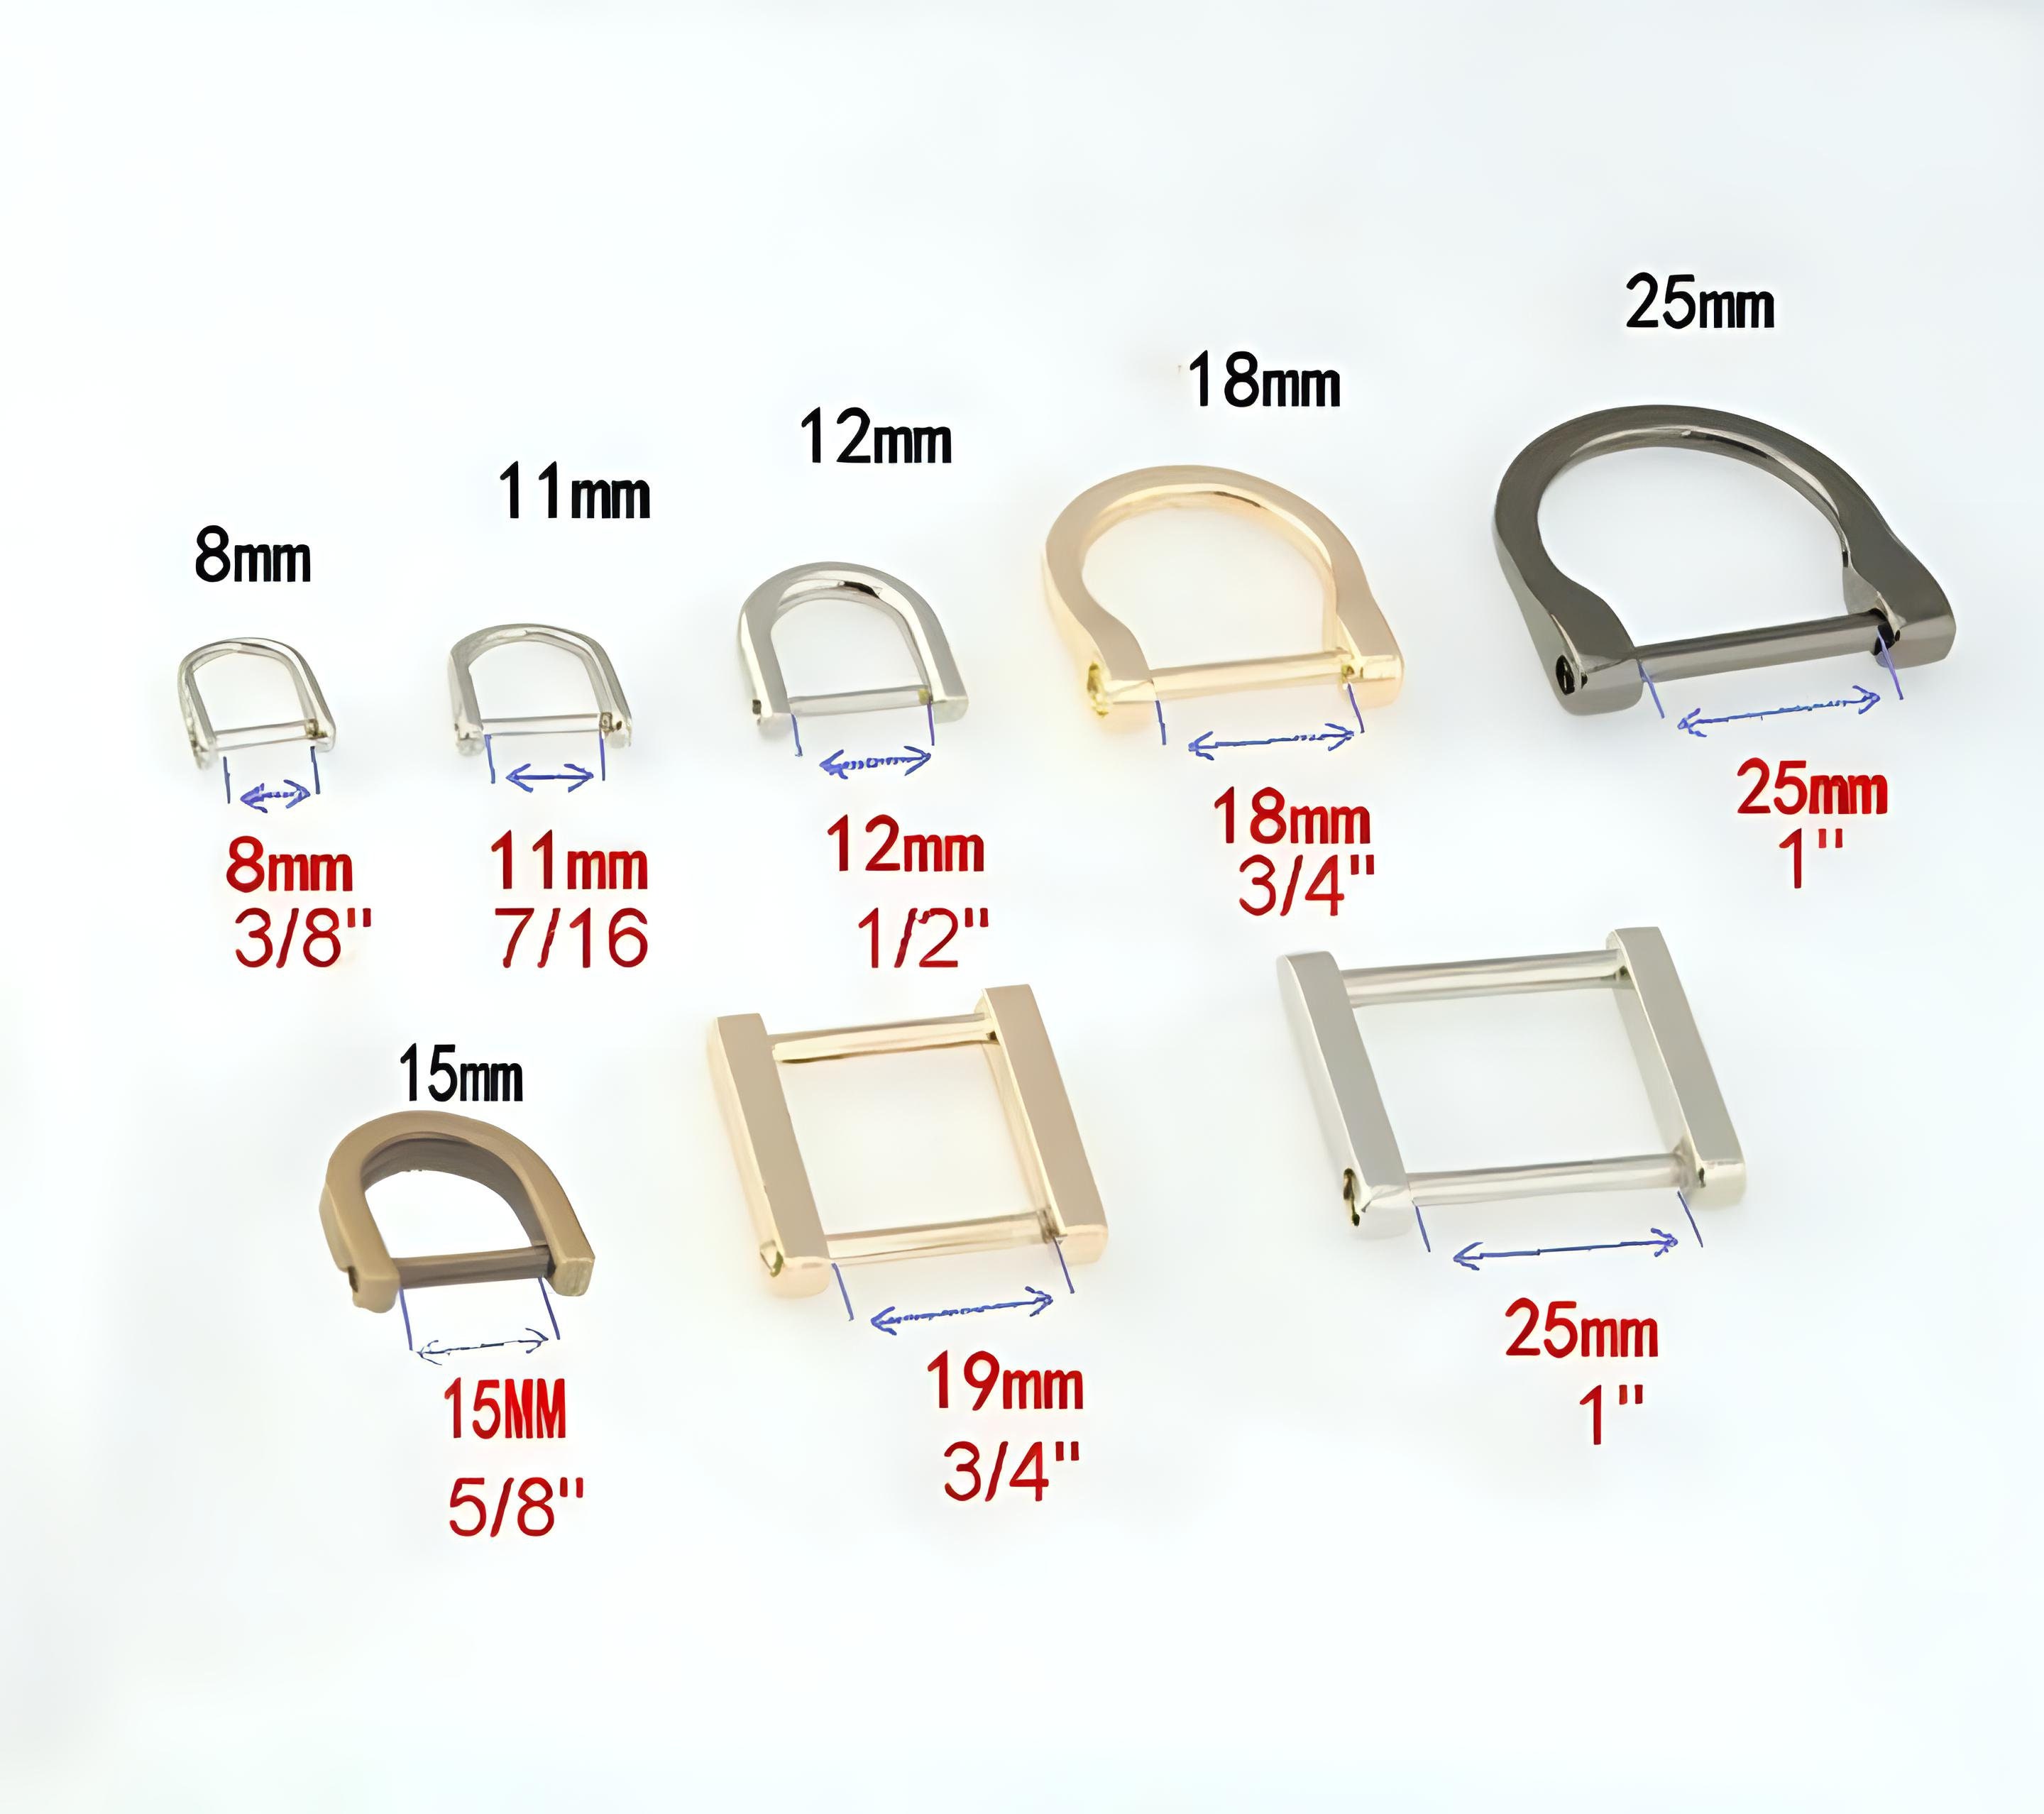 CraftOnTheCouch D-Ring Screw Buckle Square Rectangular Clasp Thick Zipper Puller Horse Shoe Vachette Webbing Strap Holder Connector Purse Bag Belt Hardware